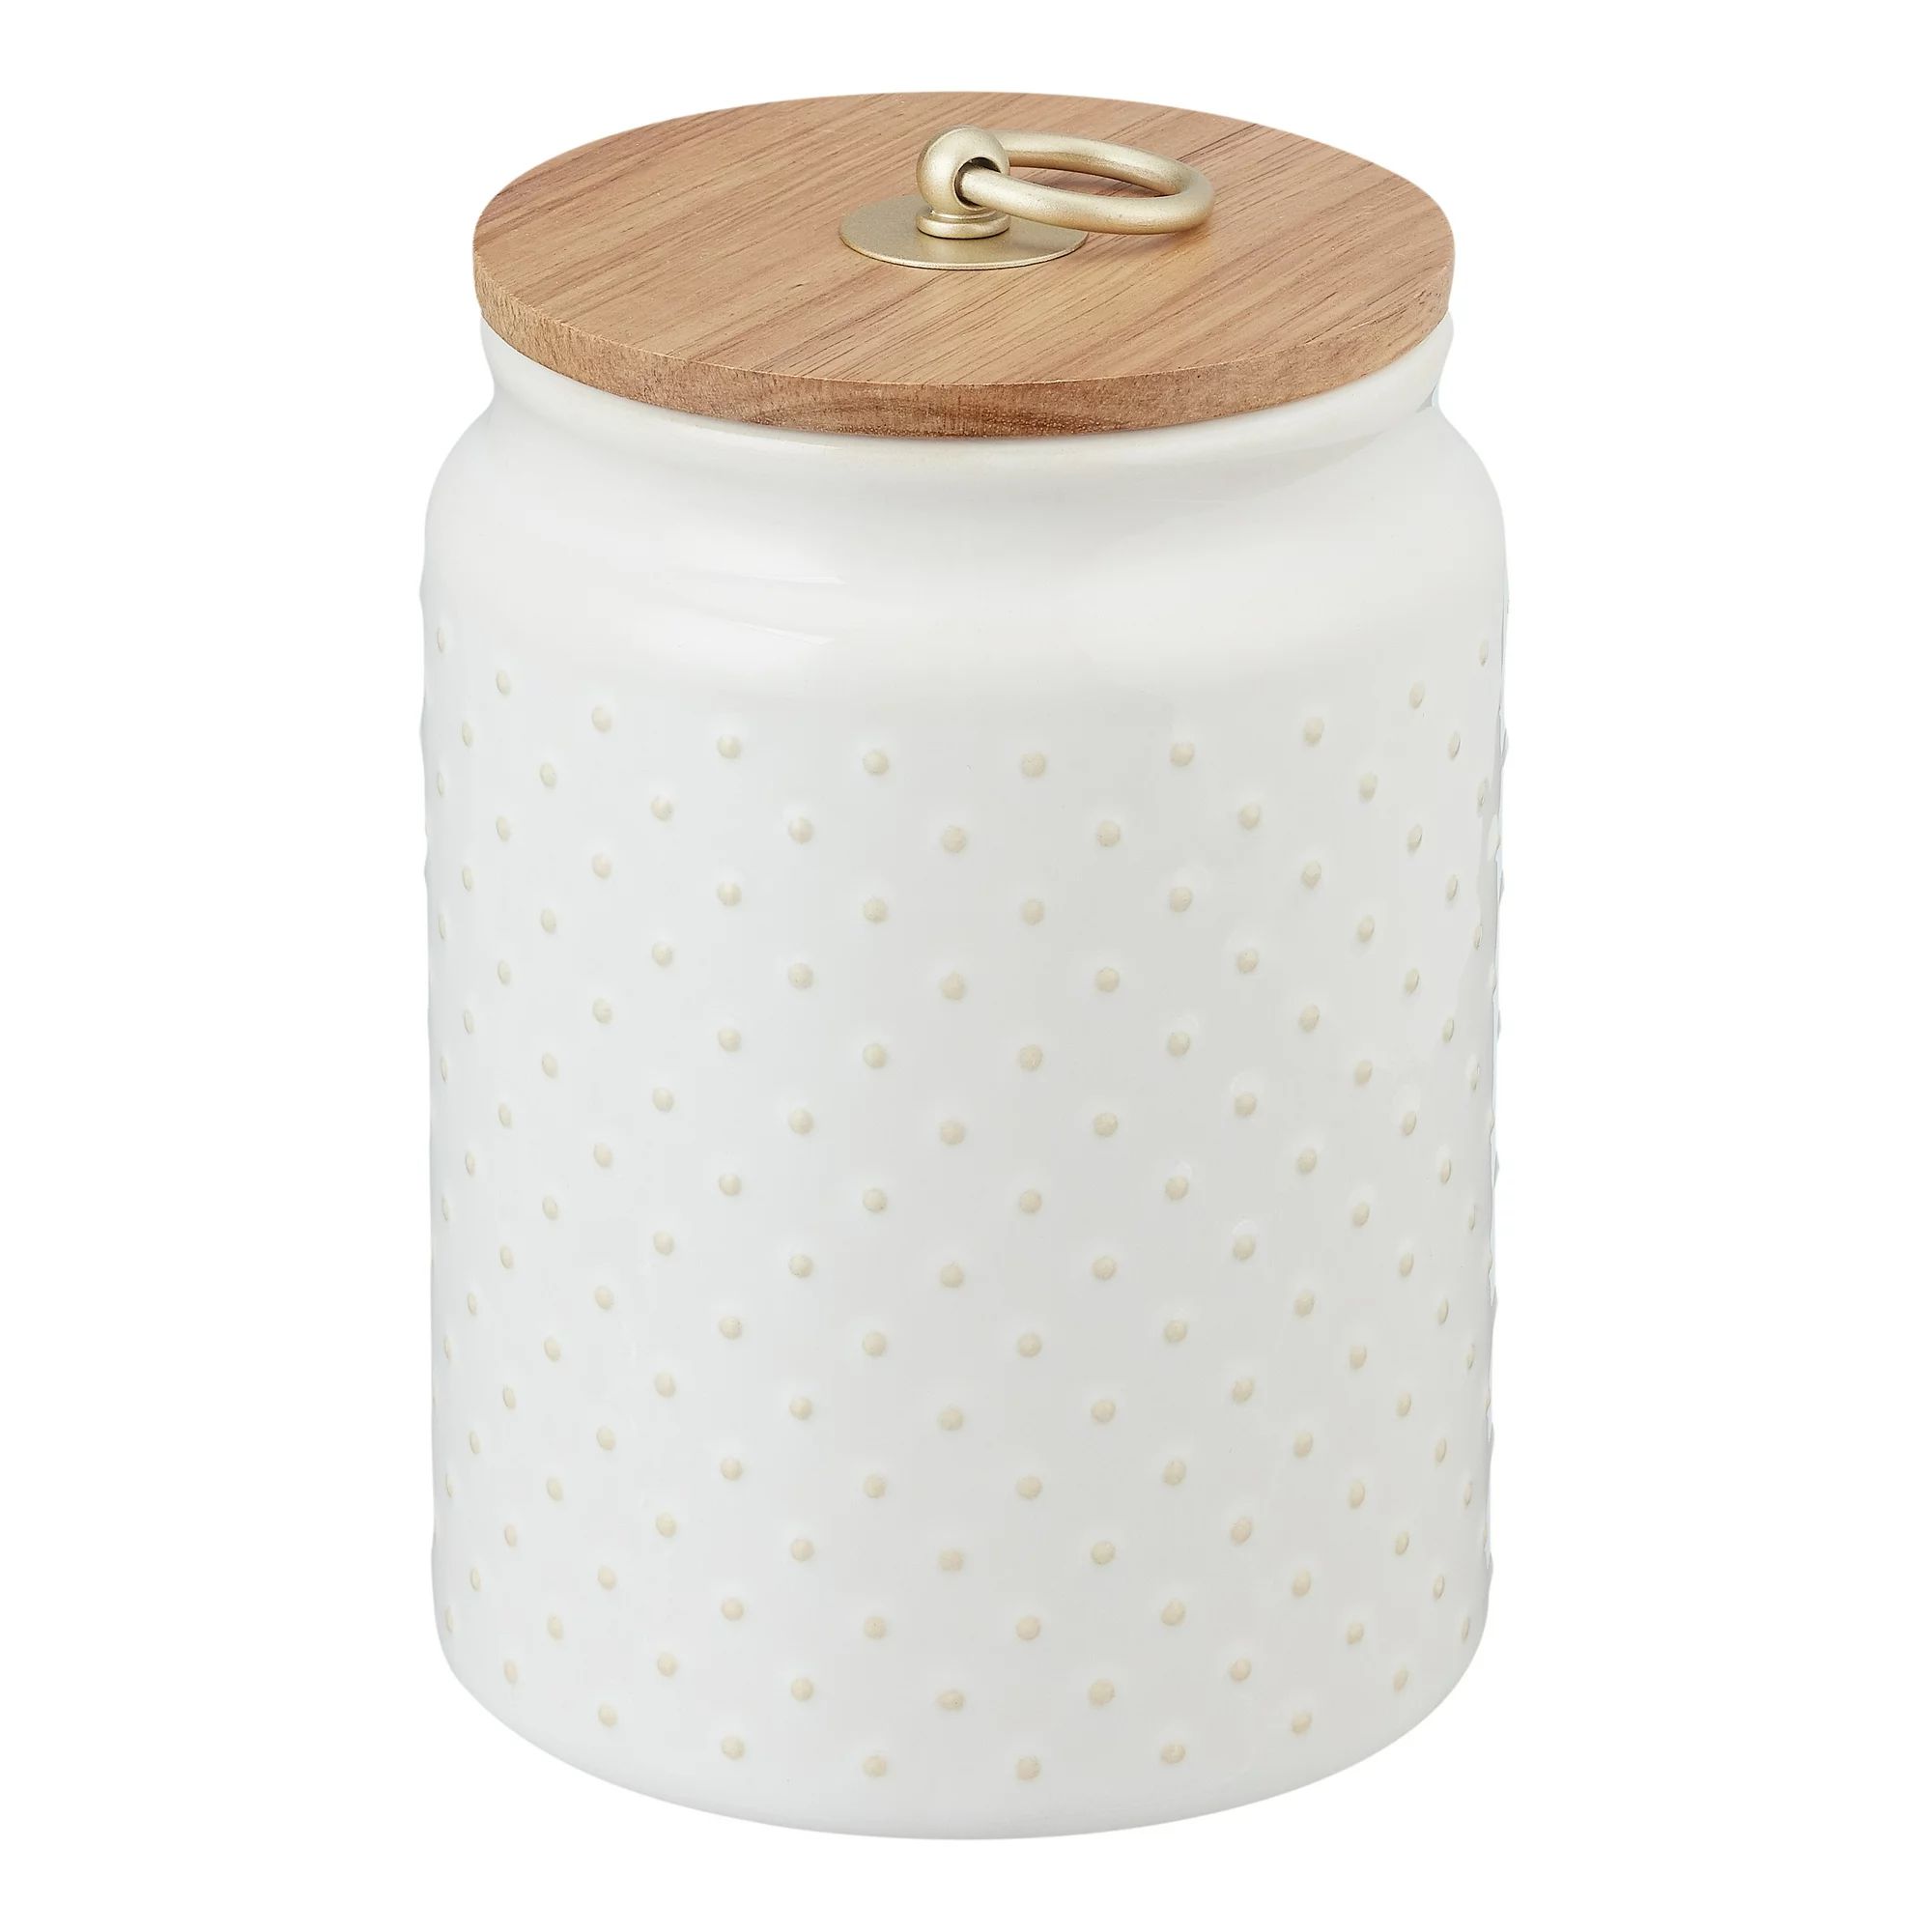 Better Homes & Gardens Ceramic Hobnail Canister Small white , Food Storage Canister. | Walmart (US)